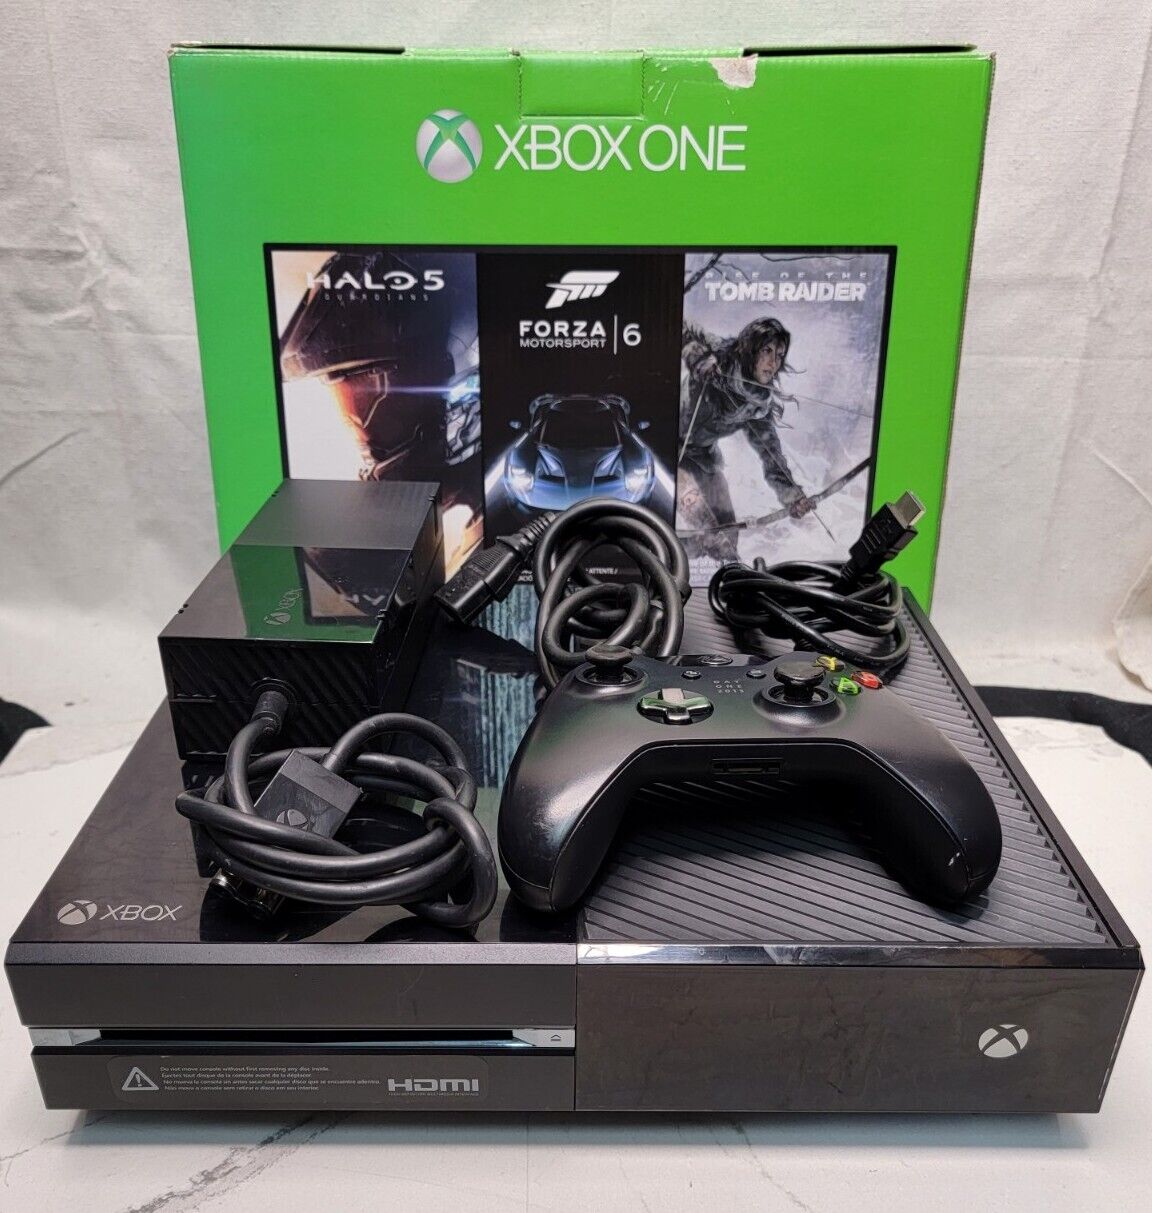 Microsoft 1540 Xbox One 500 GB Console Video Game System Bundle In Box day  one